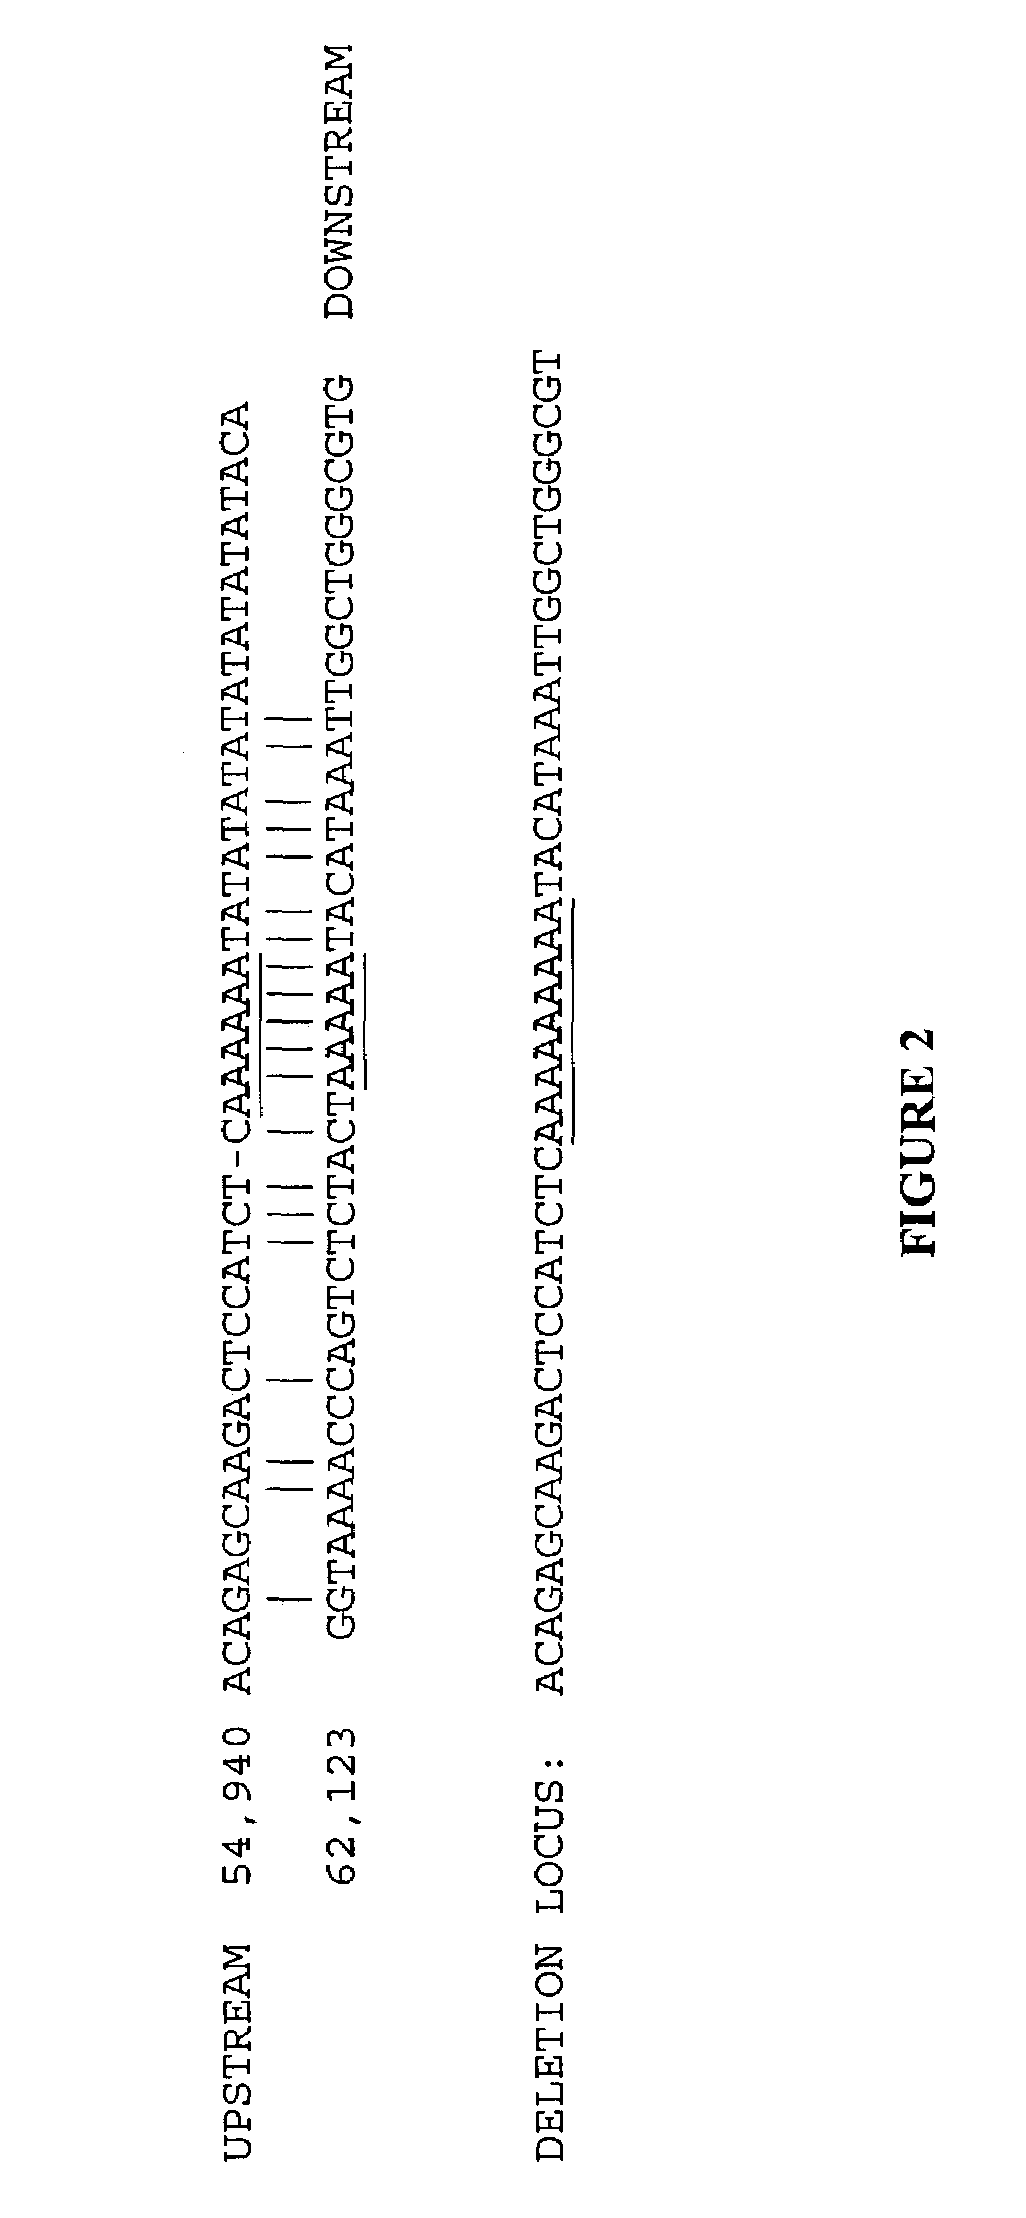 Large deletions in human BRCA1 gene and use thereof